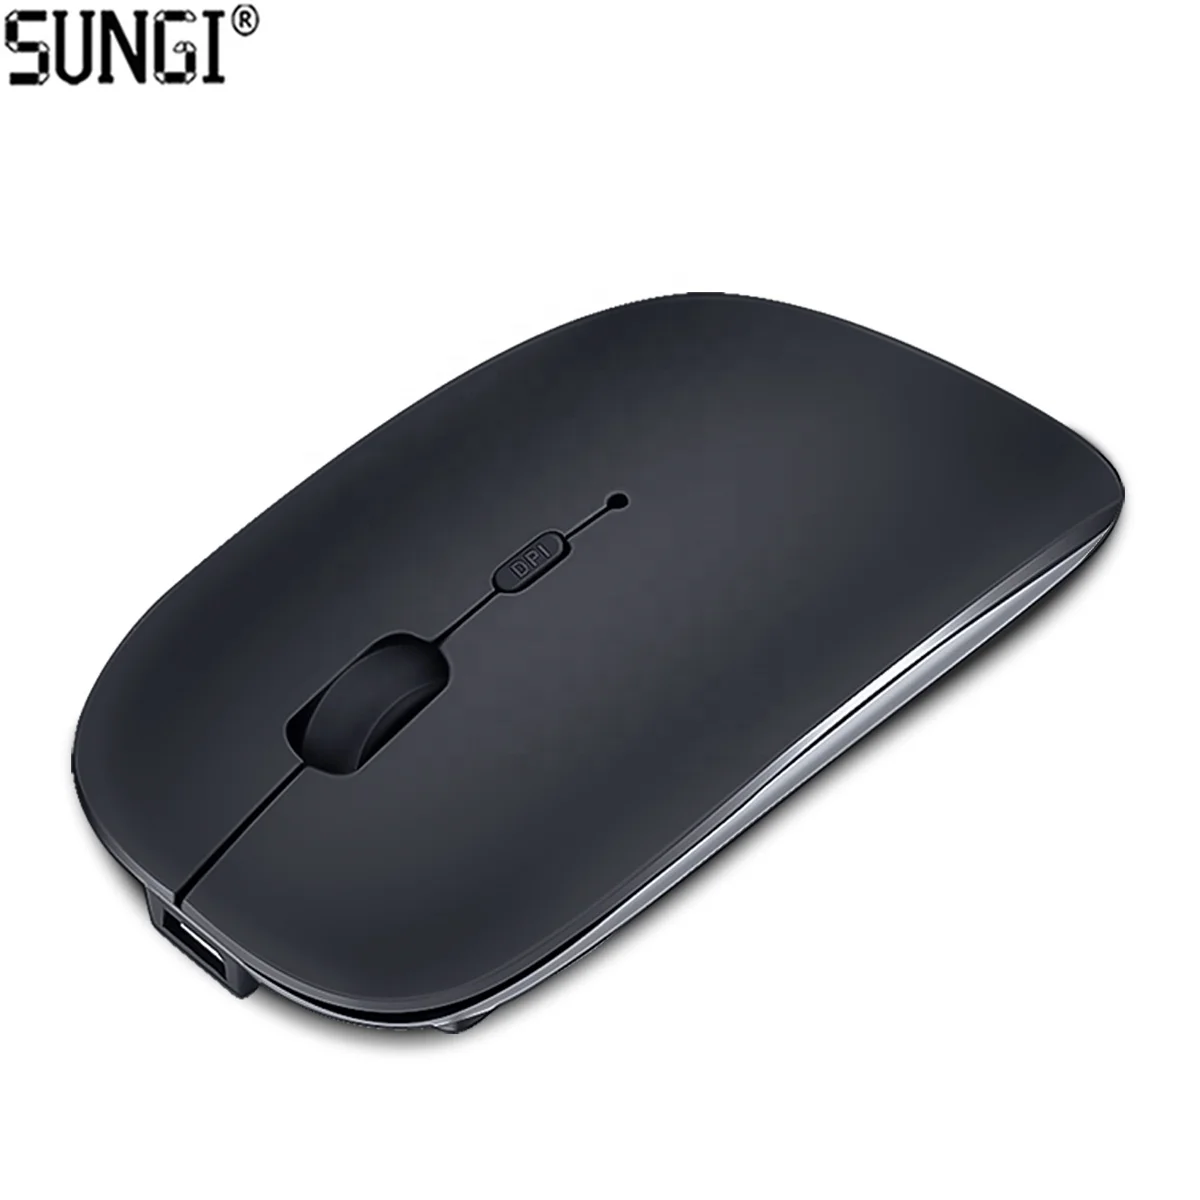 

SUNGI Good Quality Silent Wireless Bluet ooth Mouse with Rechargeable Lithium Battery for iPhone iPad Macbook, Black/white/silver/gold/rose gold/customize